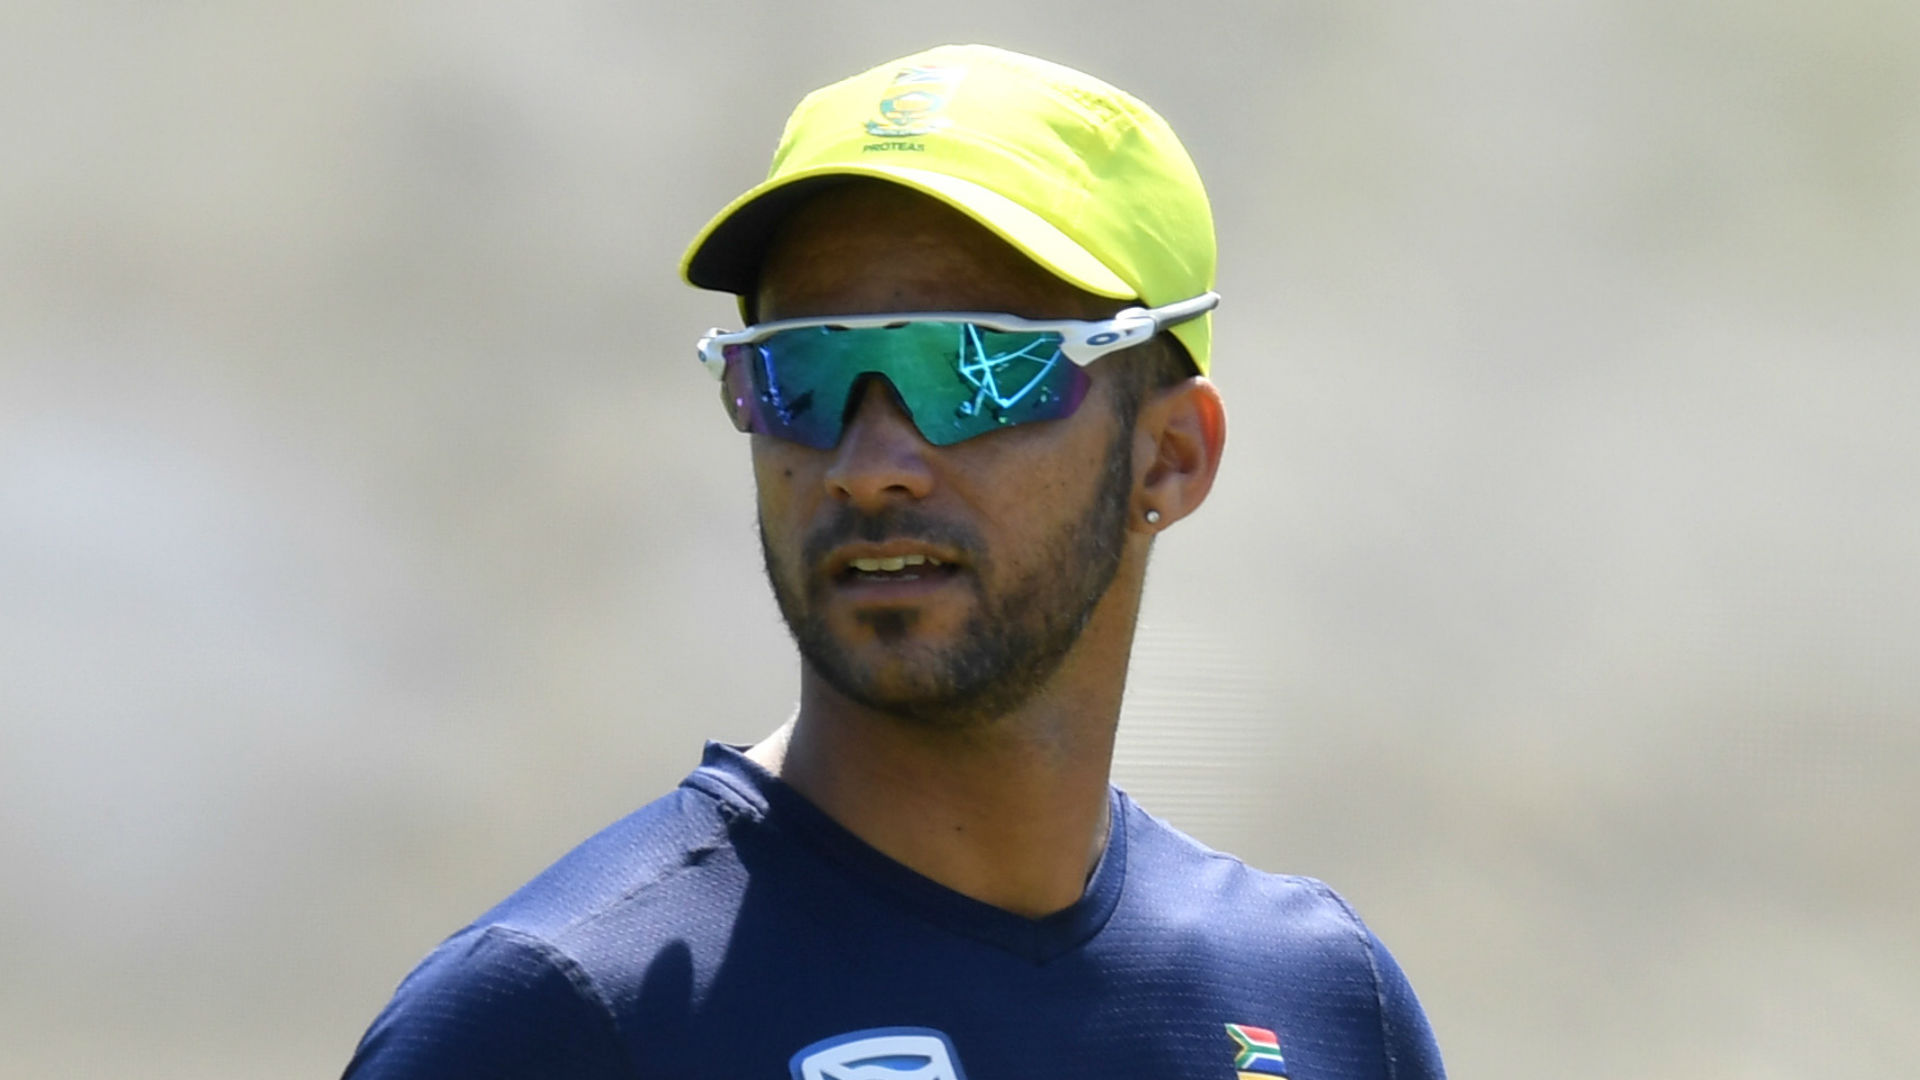 South Africa have been dealt another injury blow, with JP Duminy following Hashim Amla in missing the tour to Australia.